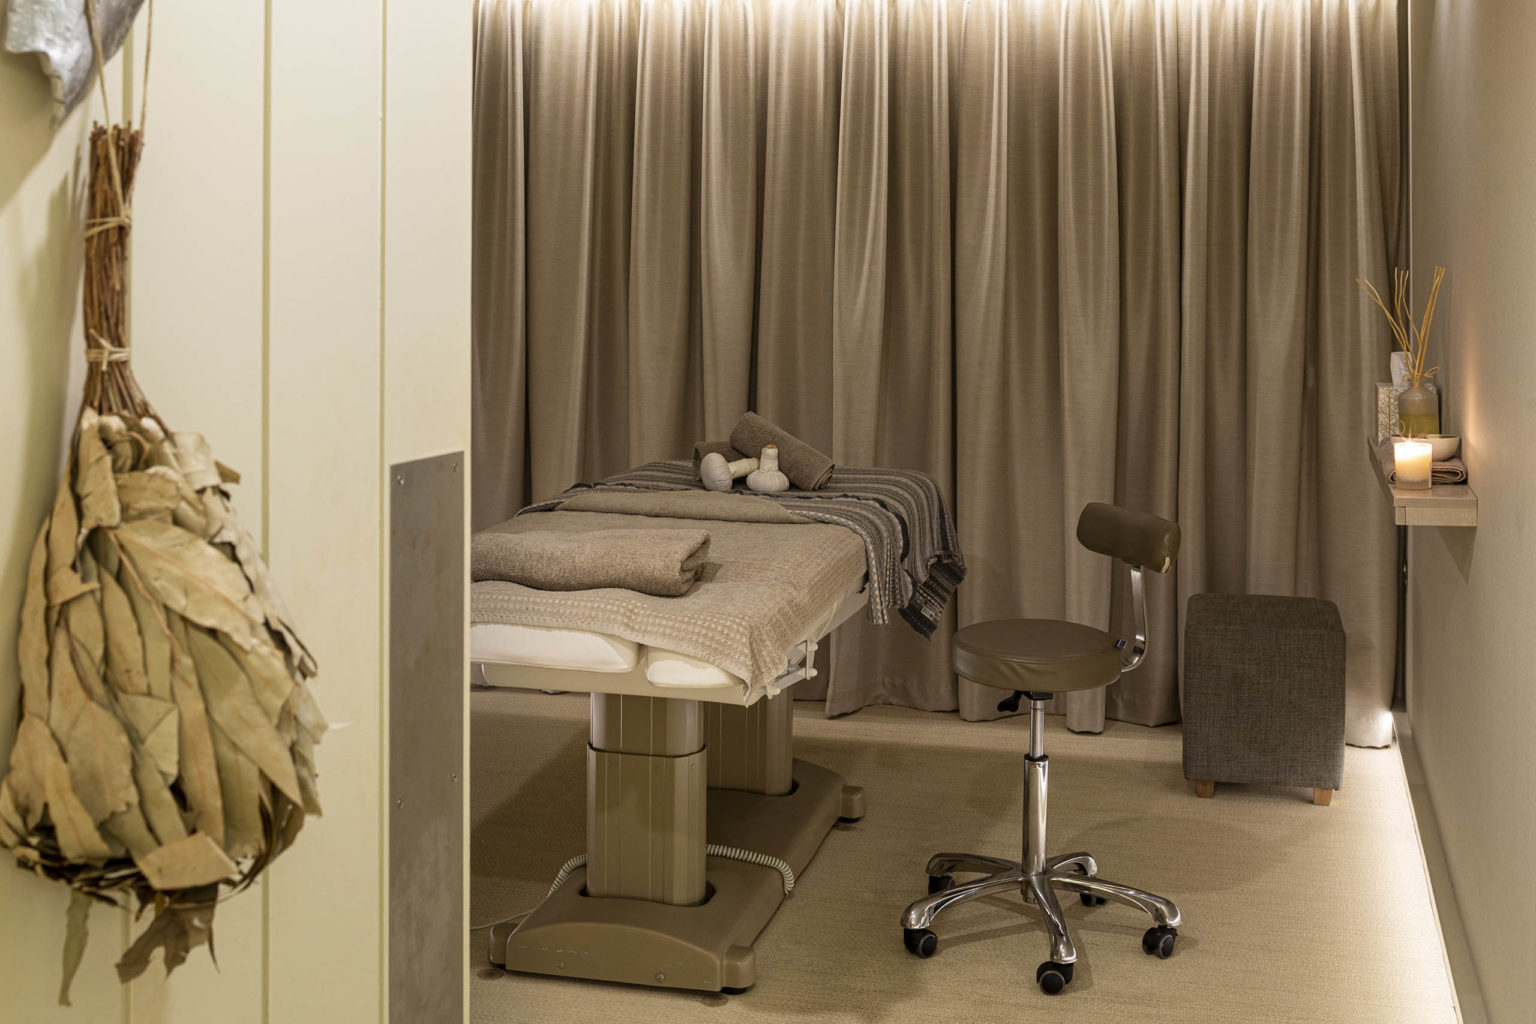 A spa treatment room at Swinton Country Club and Spa in North Yorkshire